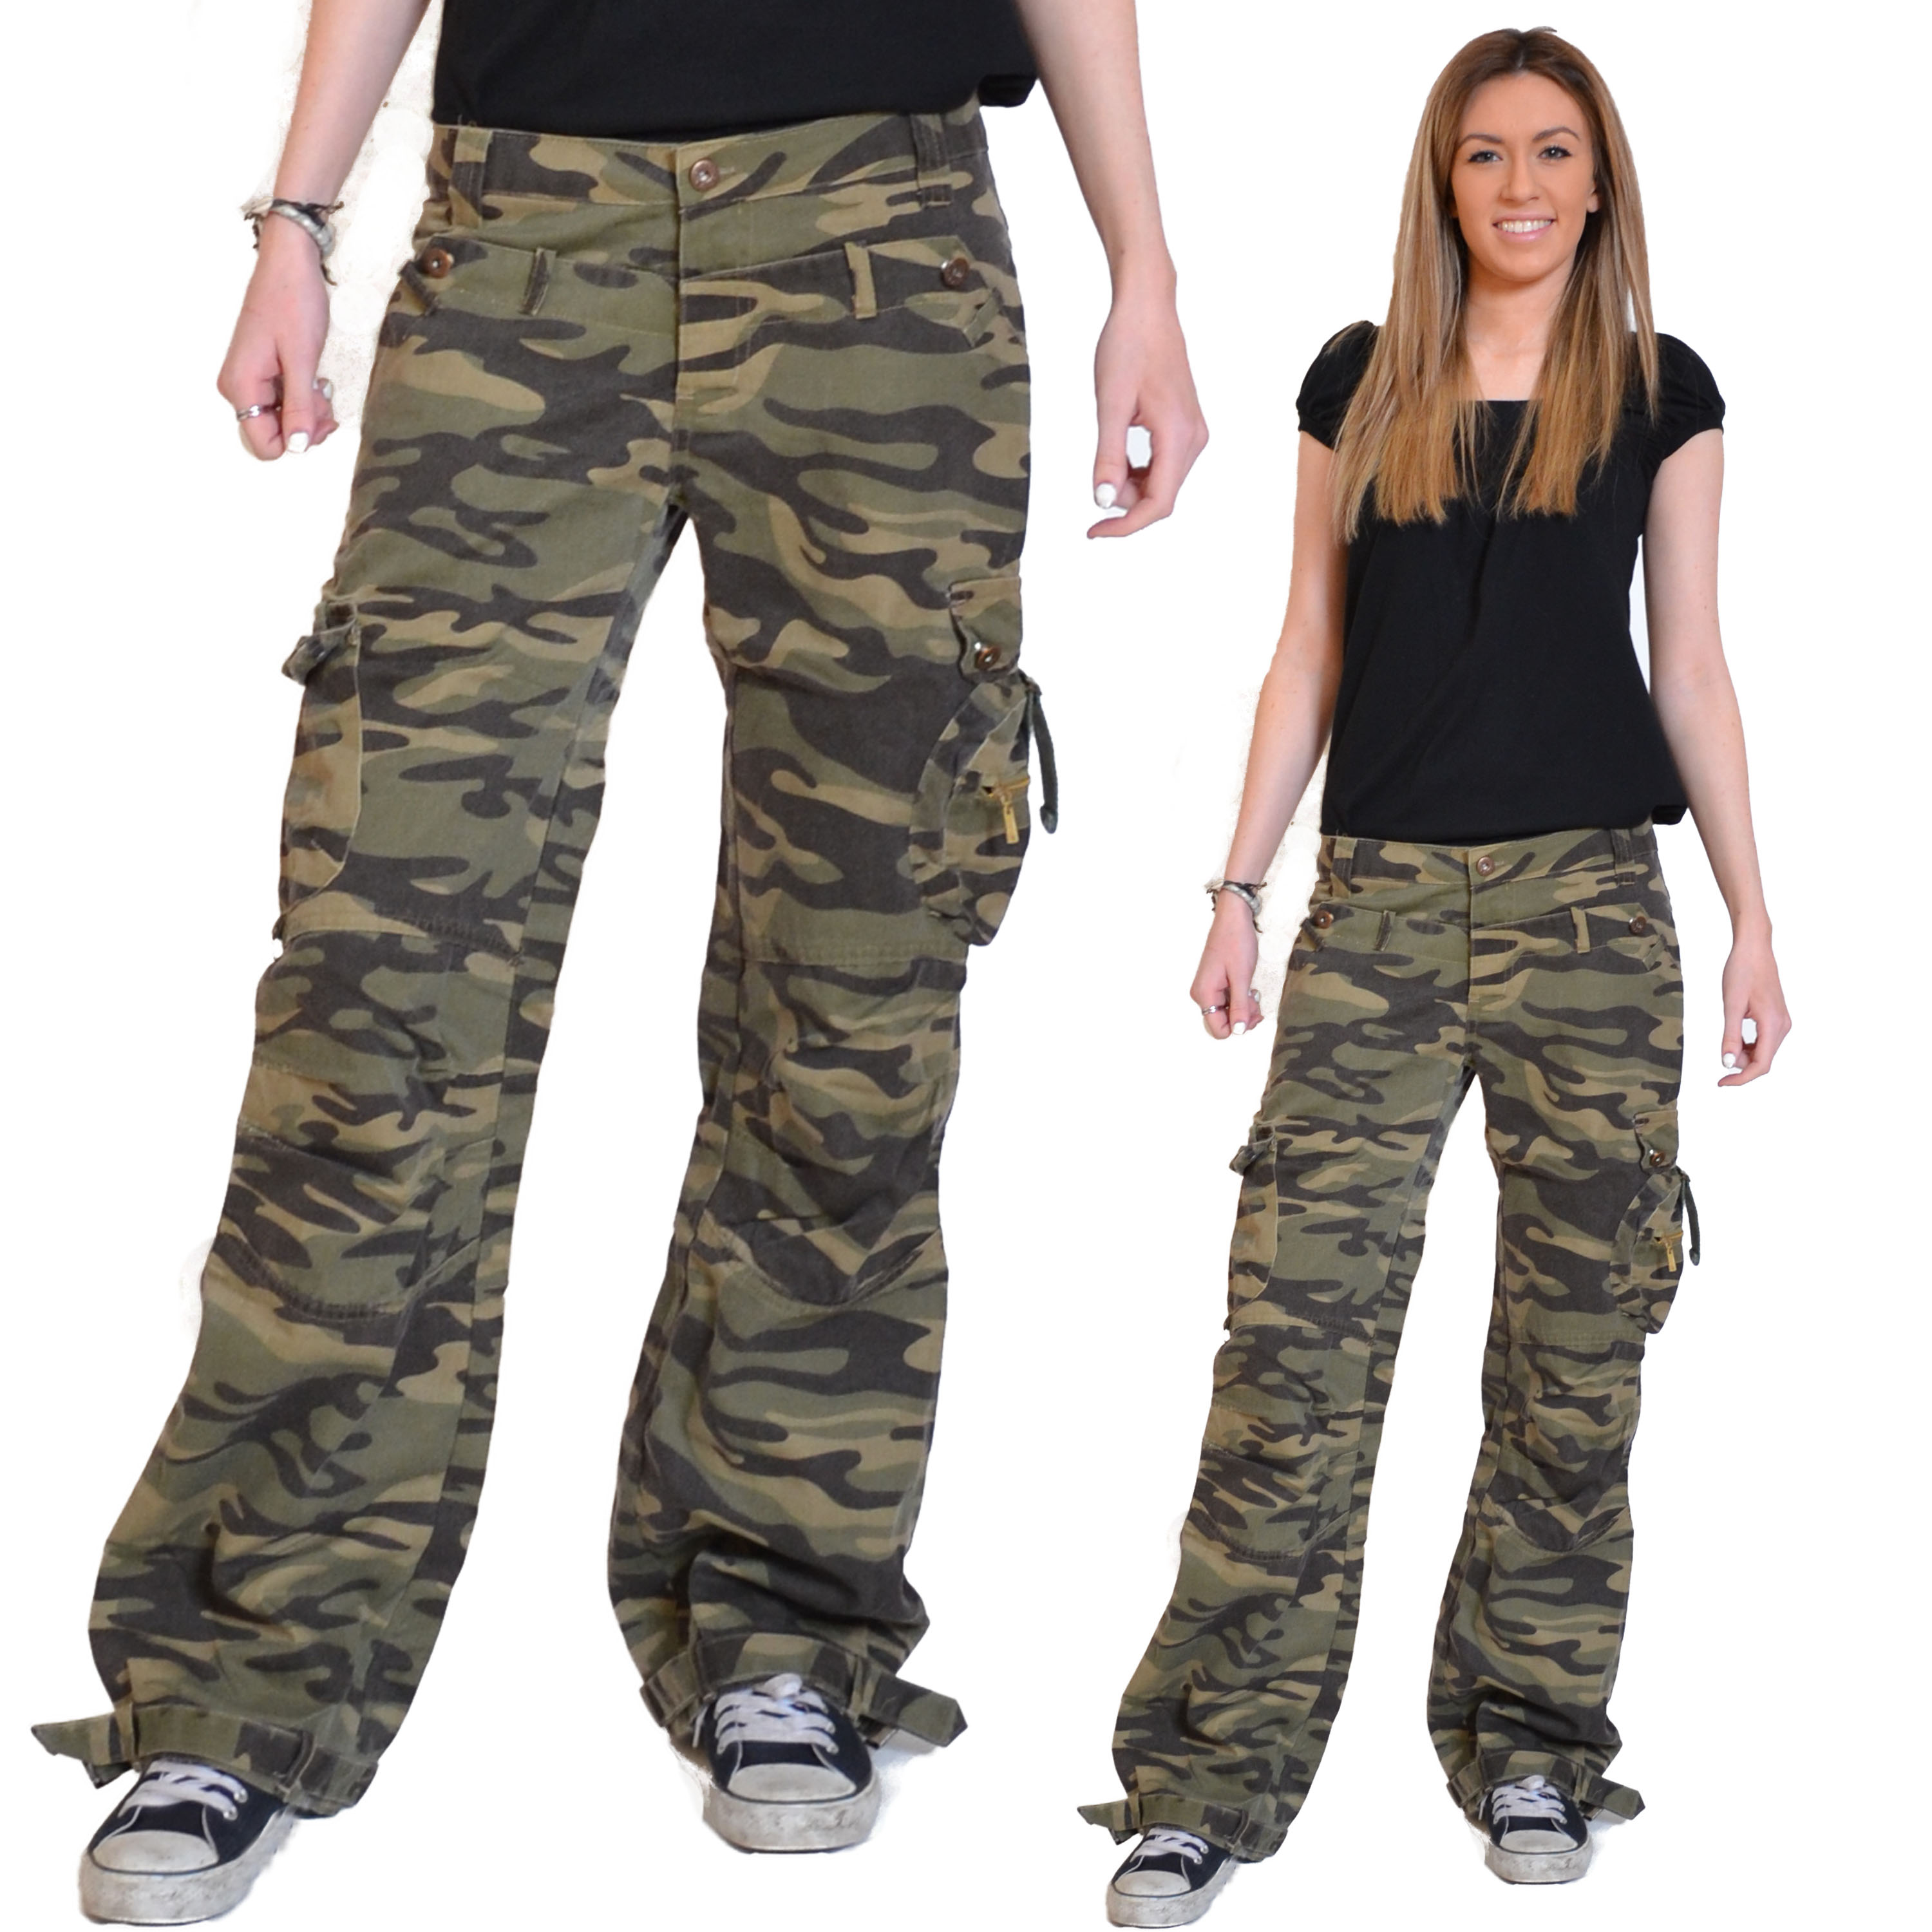 Women's Army Green Cargo Pants - Army Military